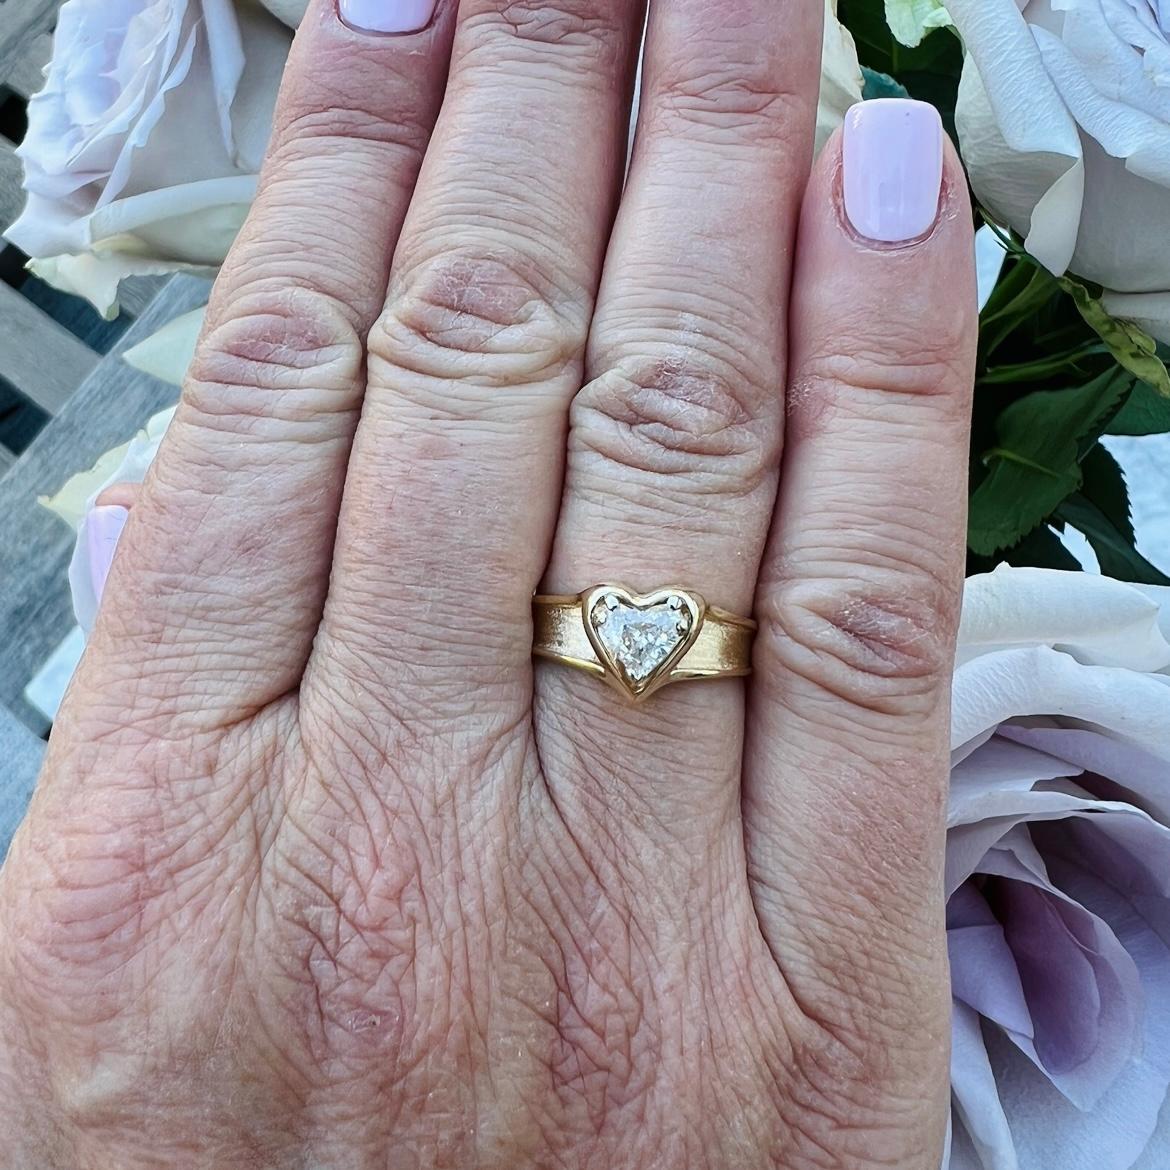 Love is in the air! With this 14k gold engagement ring, express your love with a heart-shaped diamond weighing approximately .58-ct., and graded G-H color and VS-SI. Set in a polished heart frame with a tapering satin band, the ring harks back to